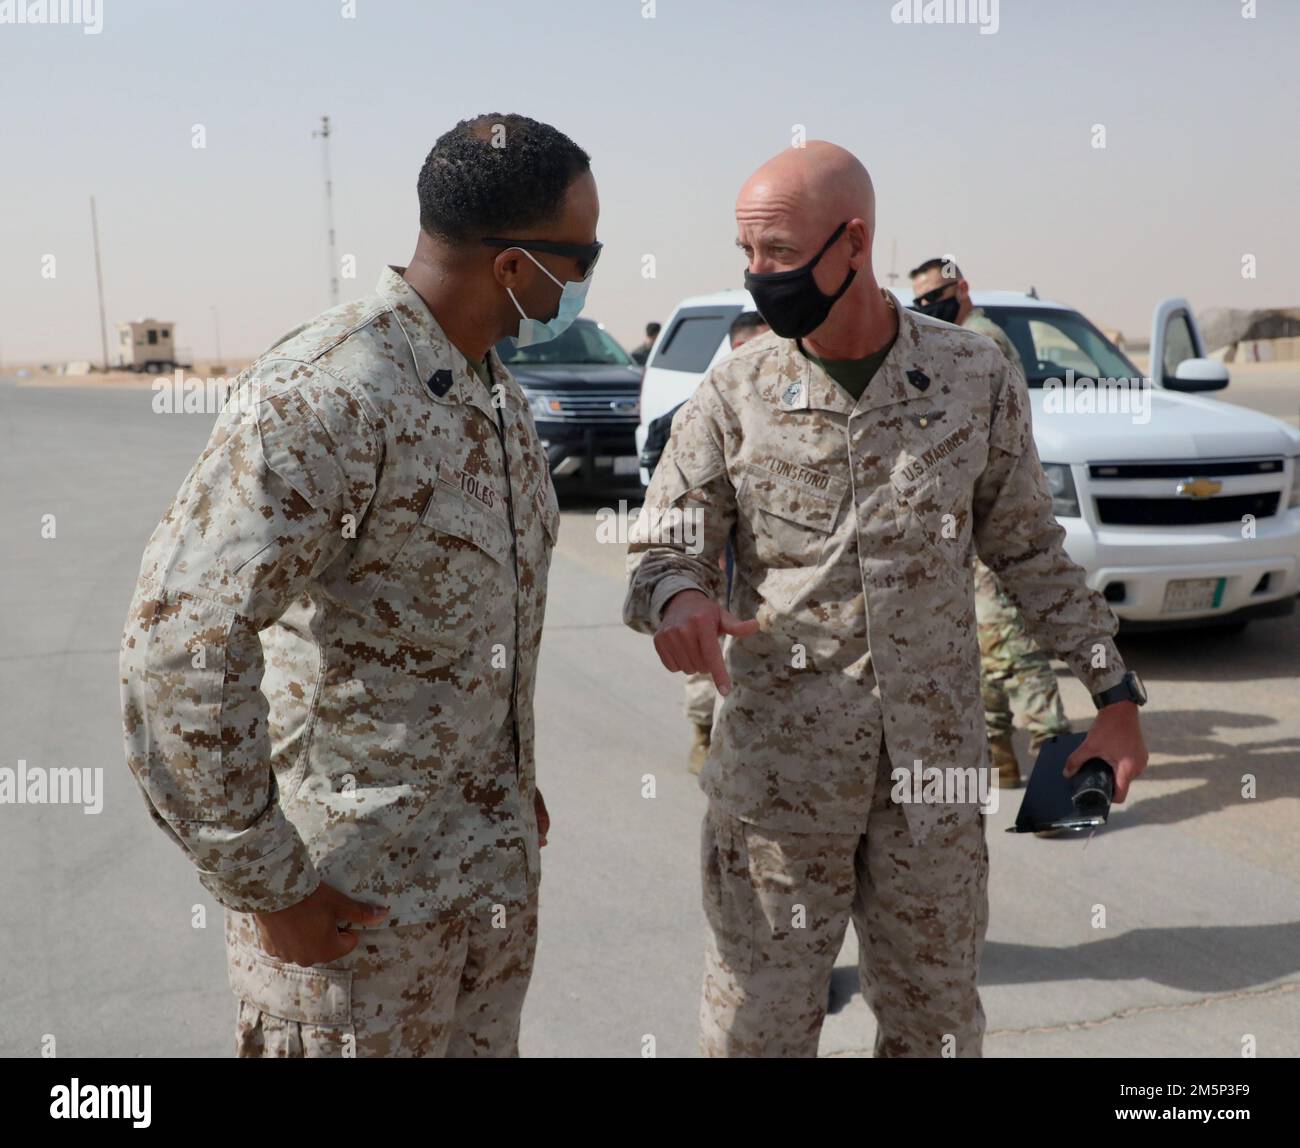 U.S. Marine Corps Sergeant Maj. Steven Lunsford, U.S. Marine Corps Forces Central Command speaks with Sergeant Maj. Joshua Toles, Marine Fighter Attack Squadron 115 (VMFA-115) during his visit to Prince Sultan Air Base, Kingdom of Saudi Arabia on Feb. 27, 2022.VMFA-115 has been deployed to Prince Sultan Air Base in the Kingdom of Saudi Arabia since December 2021 and are an integral part of the Immediate Response Force in the Central Command area of responsibility. Stock Photo